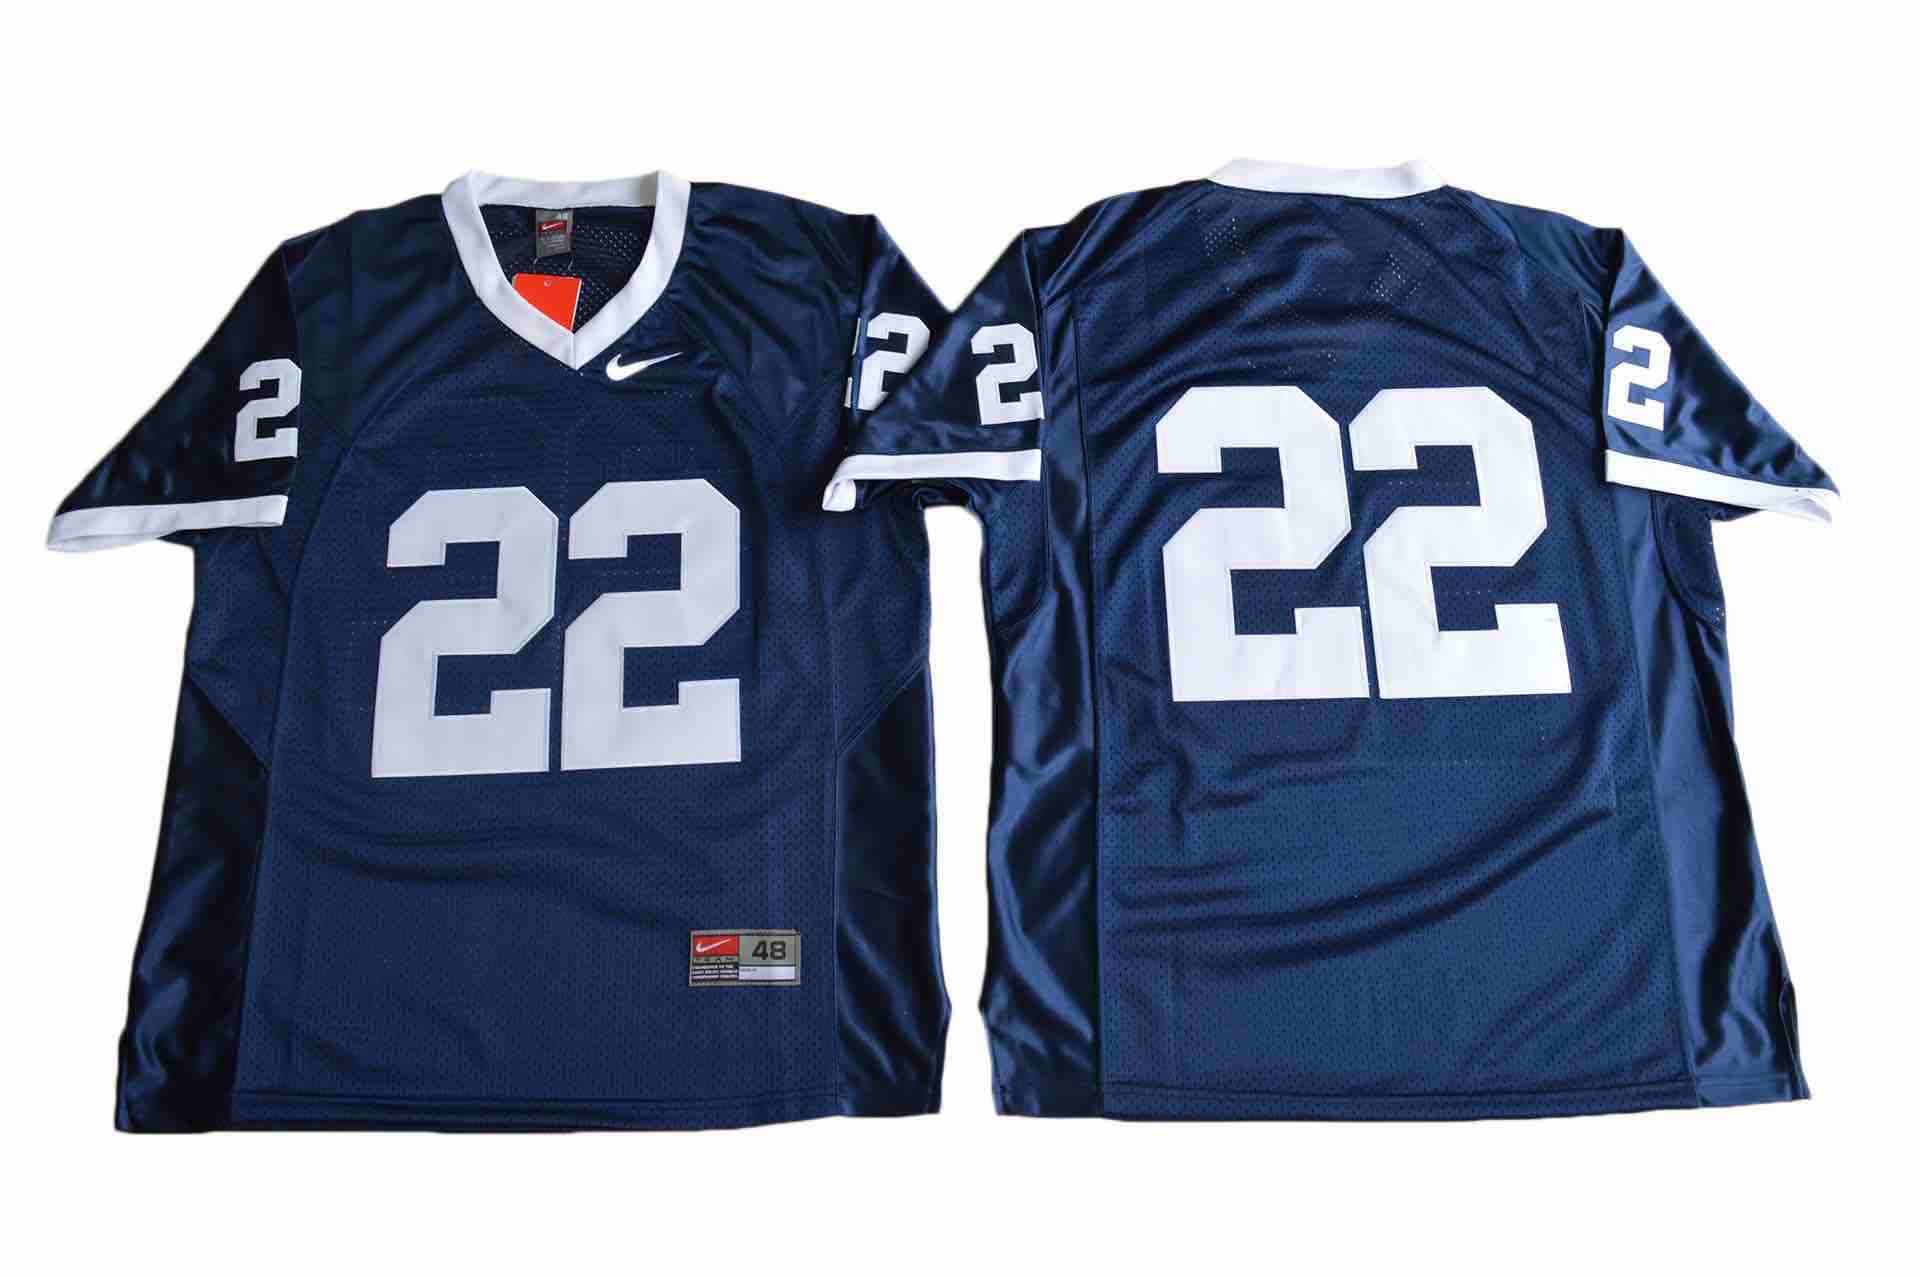 Penn State Nittany Lions 22 College Football Jersey - Navy Blue 